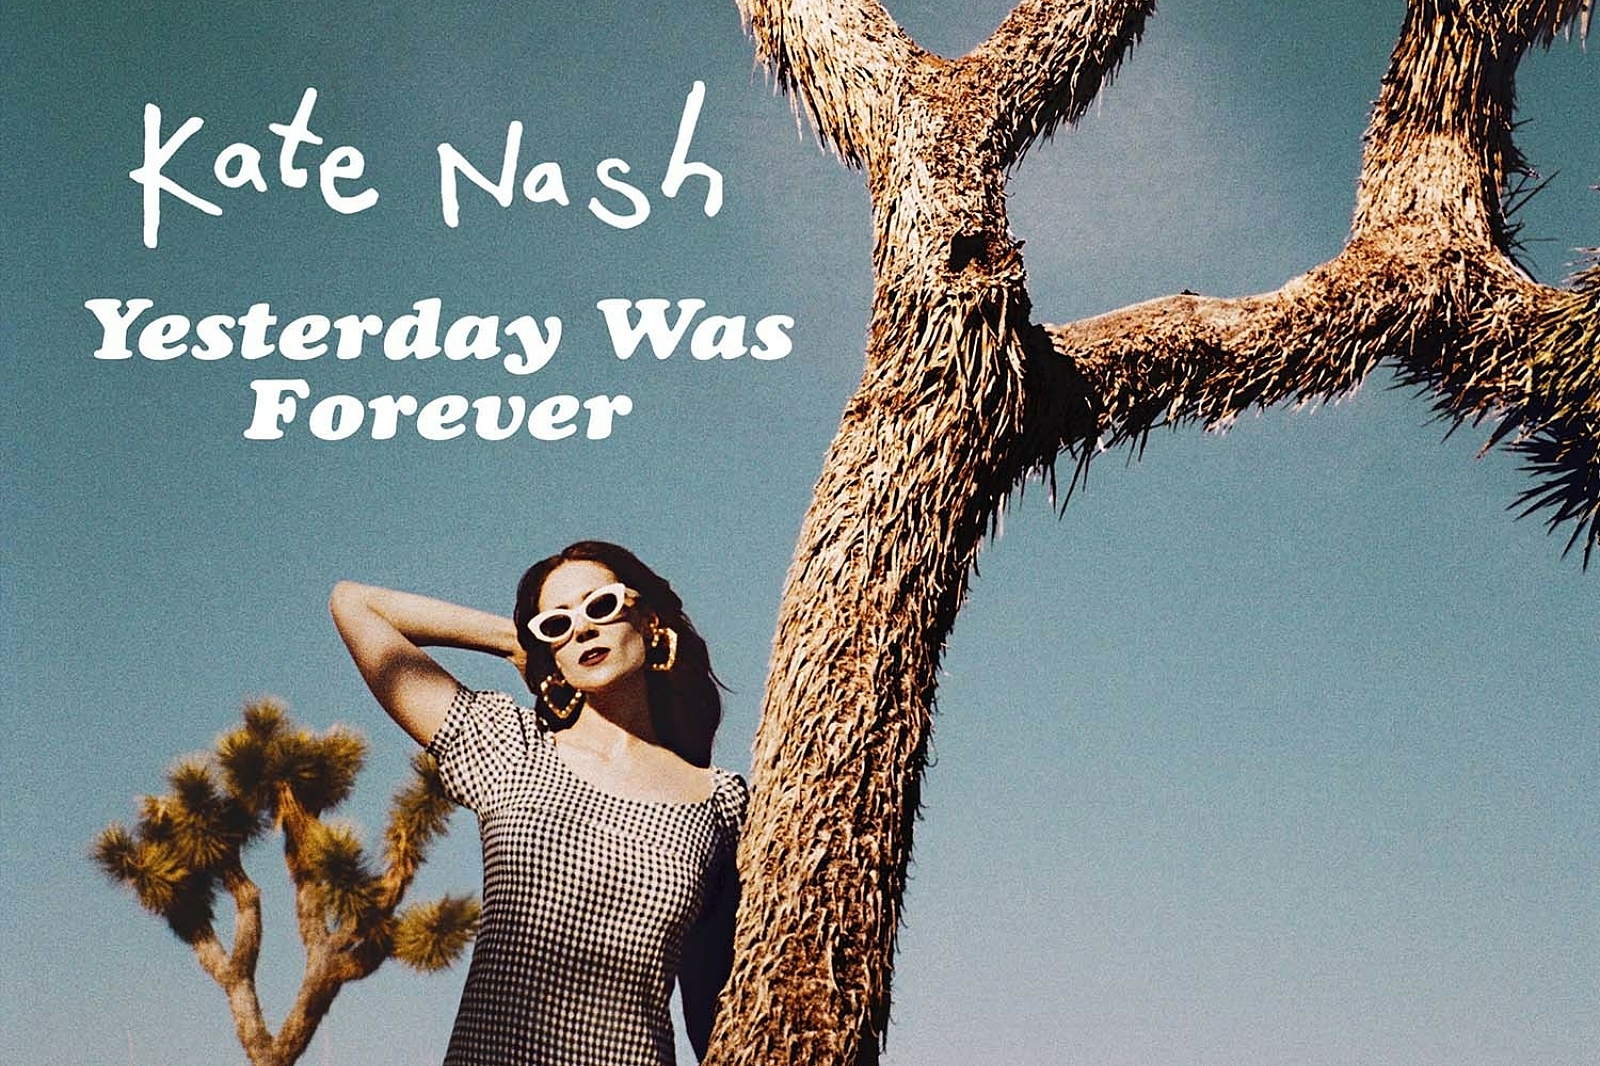 Kate Nash - Yesterday Was Forever